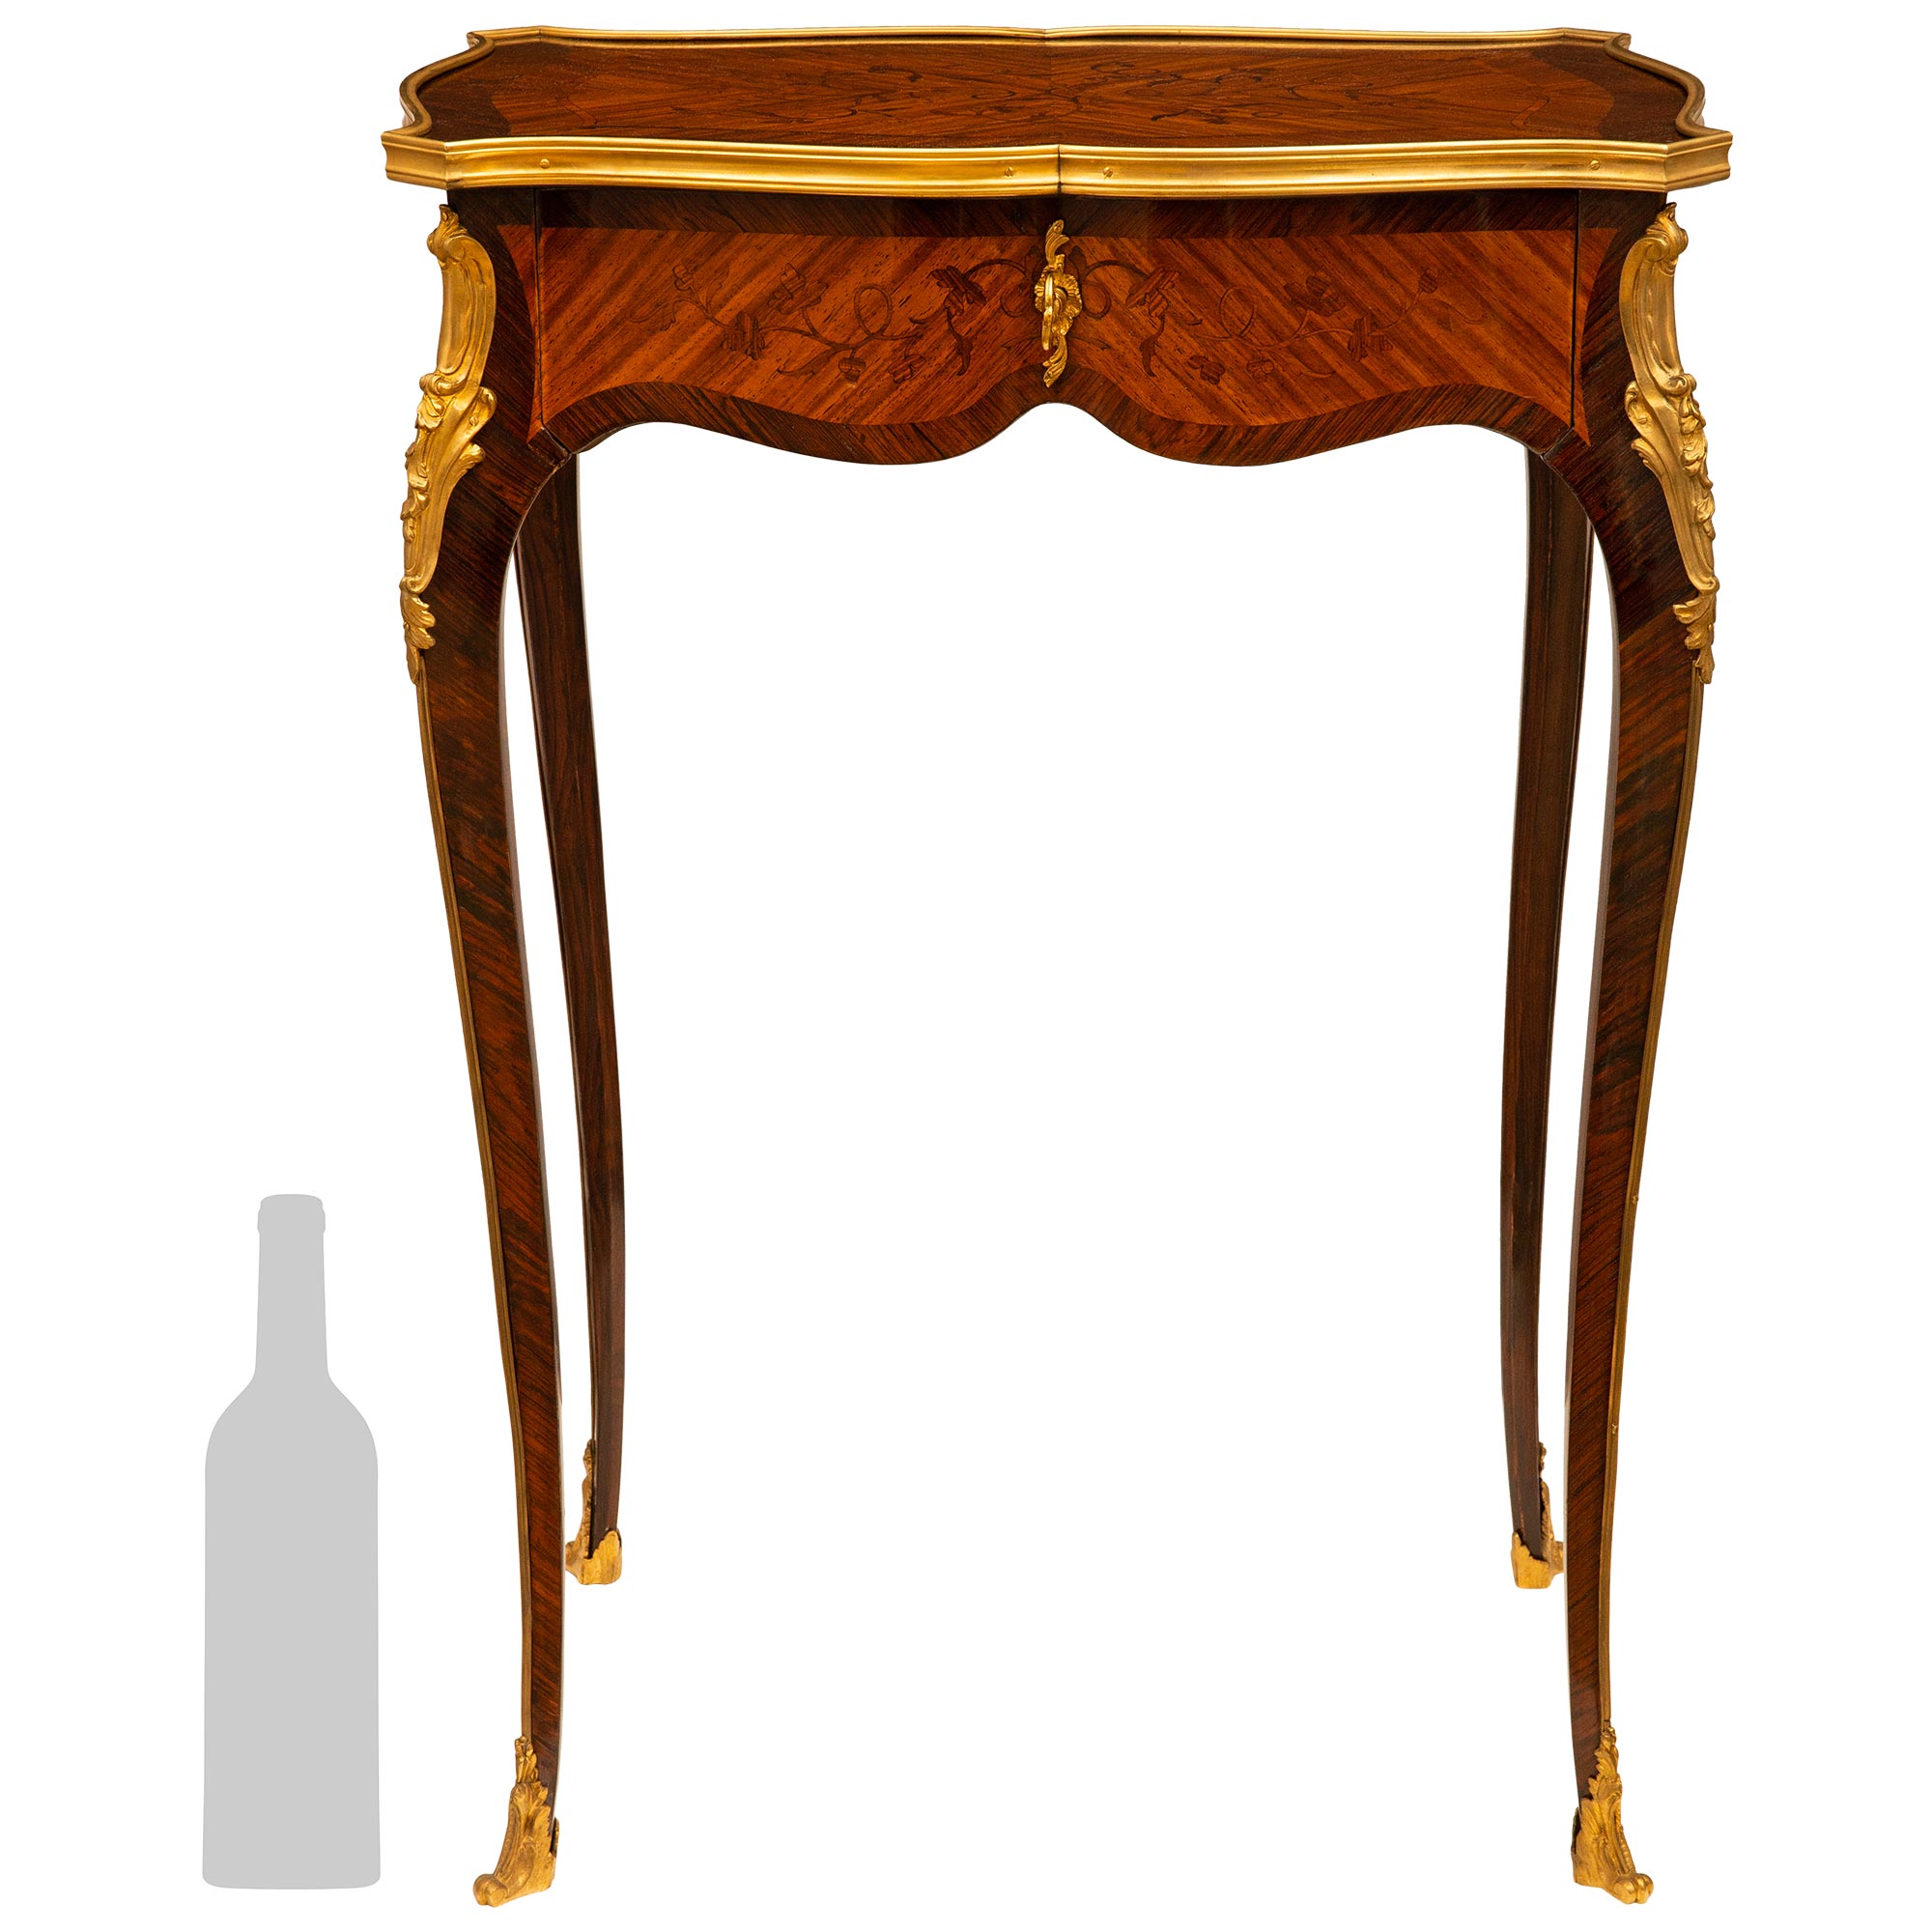  French 19th Century Louis XV Style Kingwood Side Table For Sale